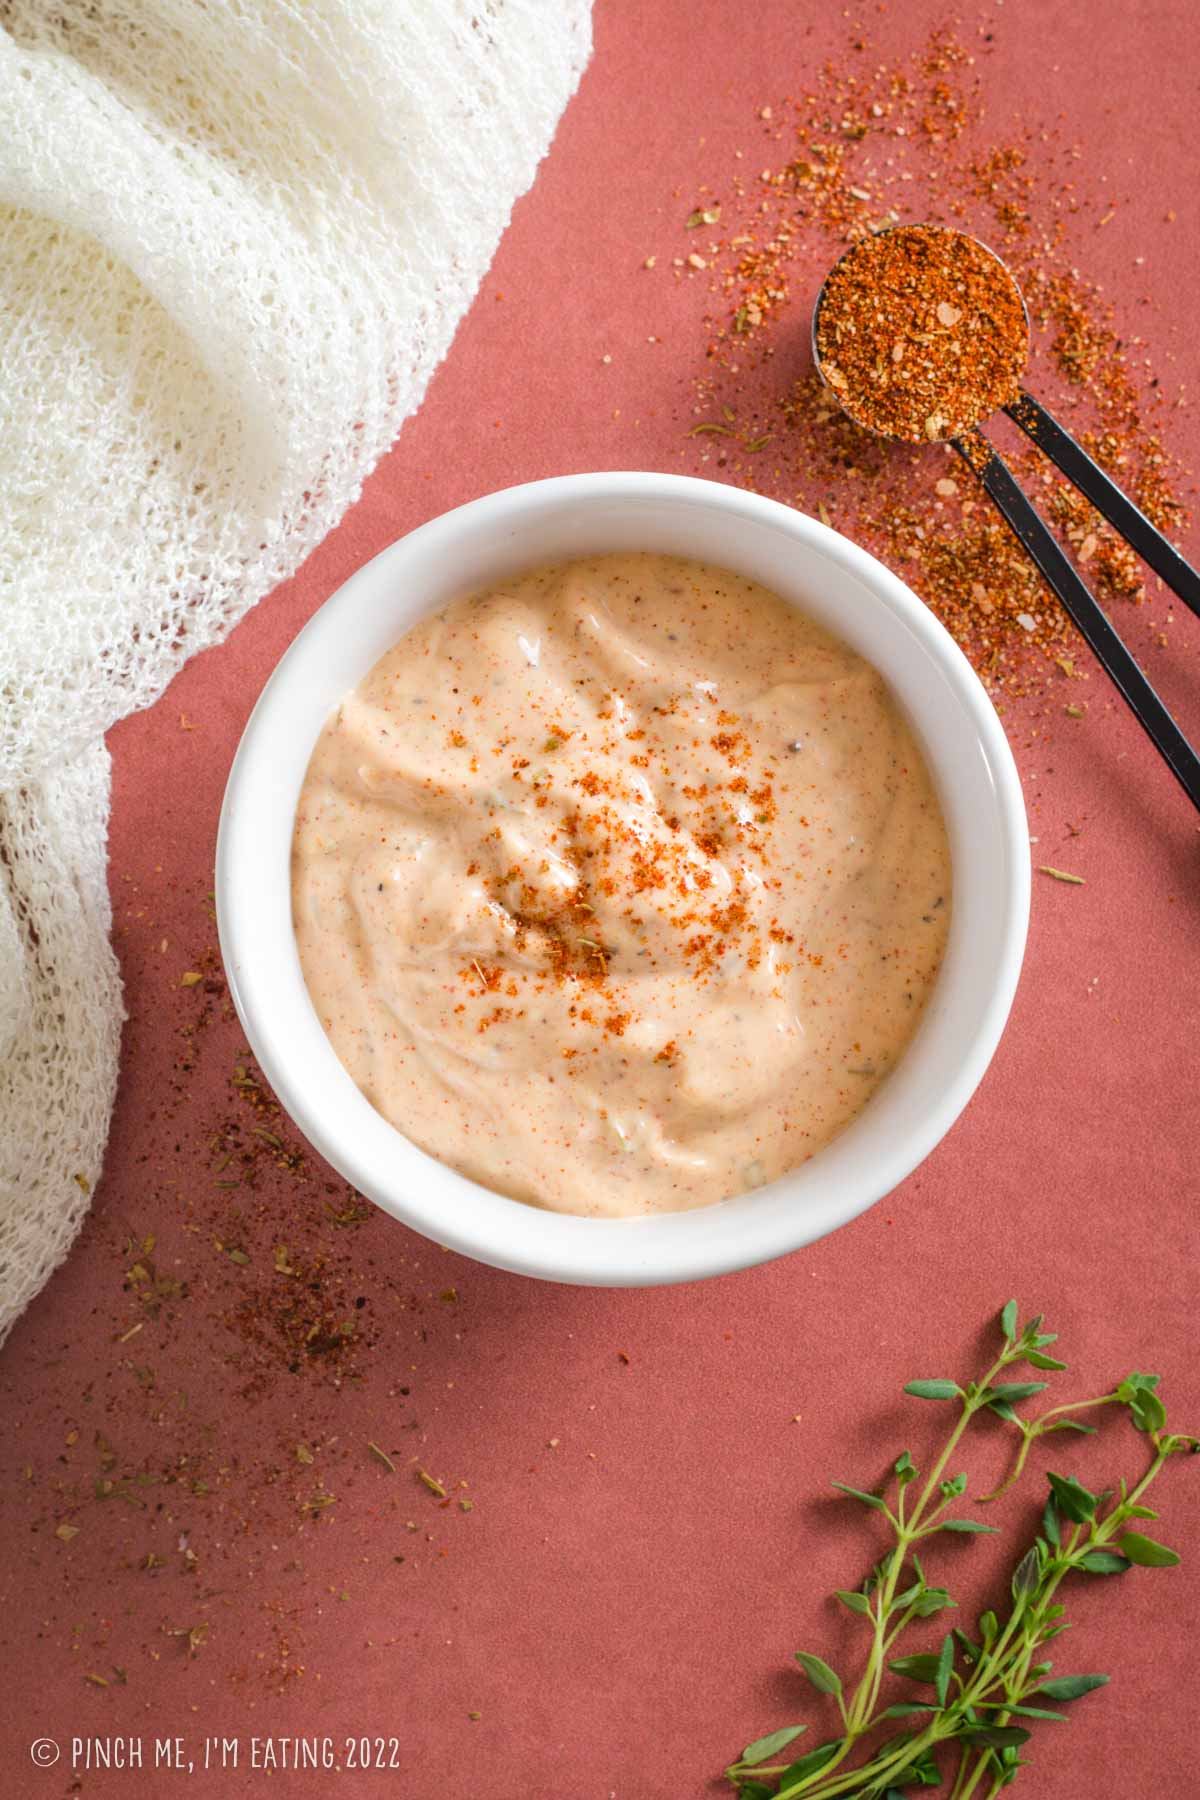 Easy homemade Cajun remoulade sauce in a white bowl garnished with blackened seasoning.